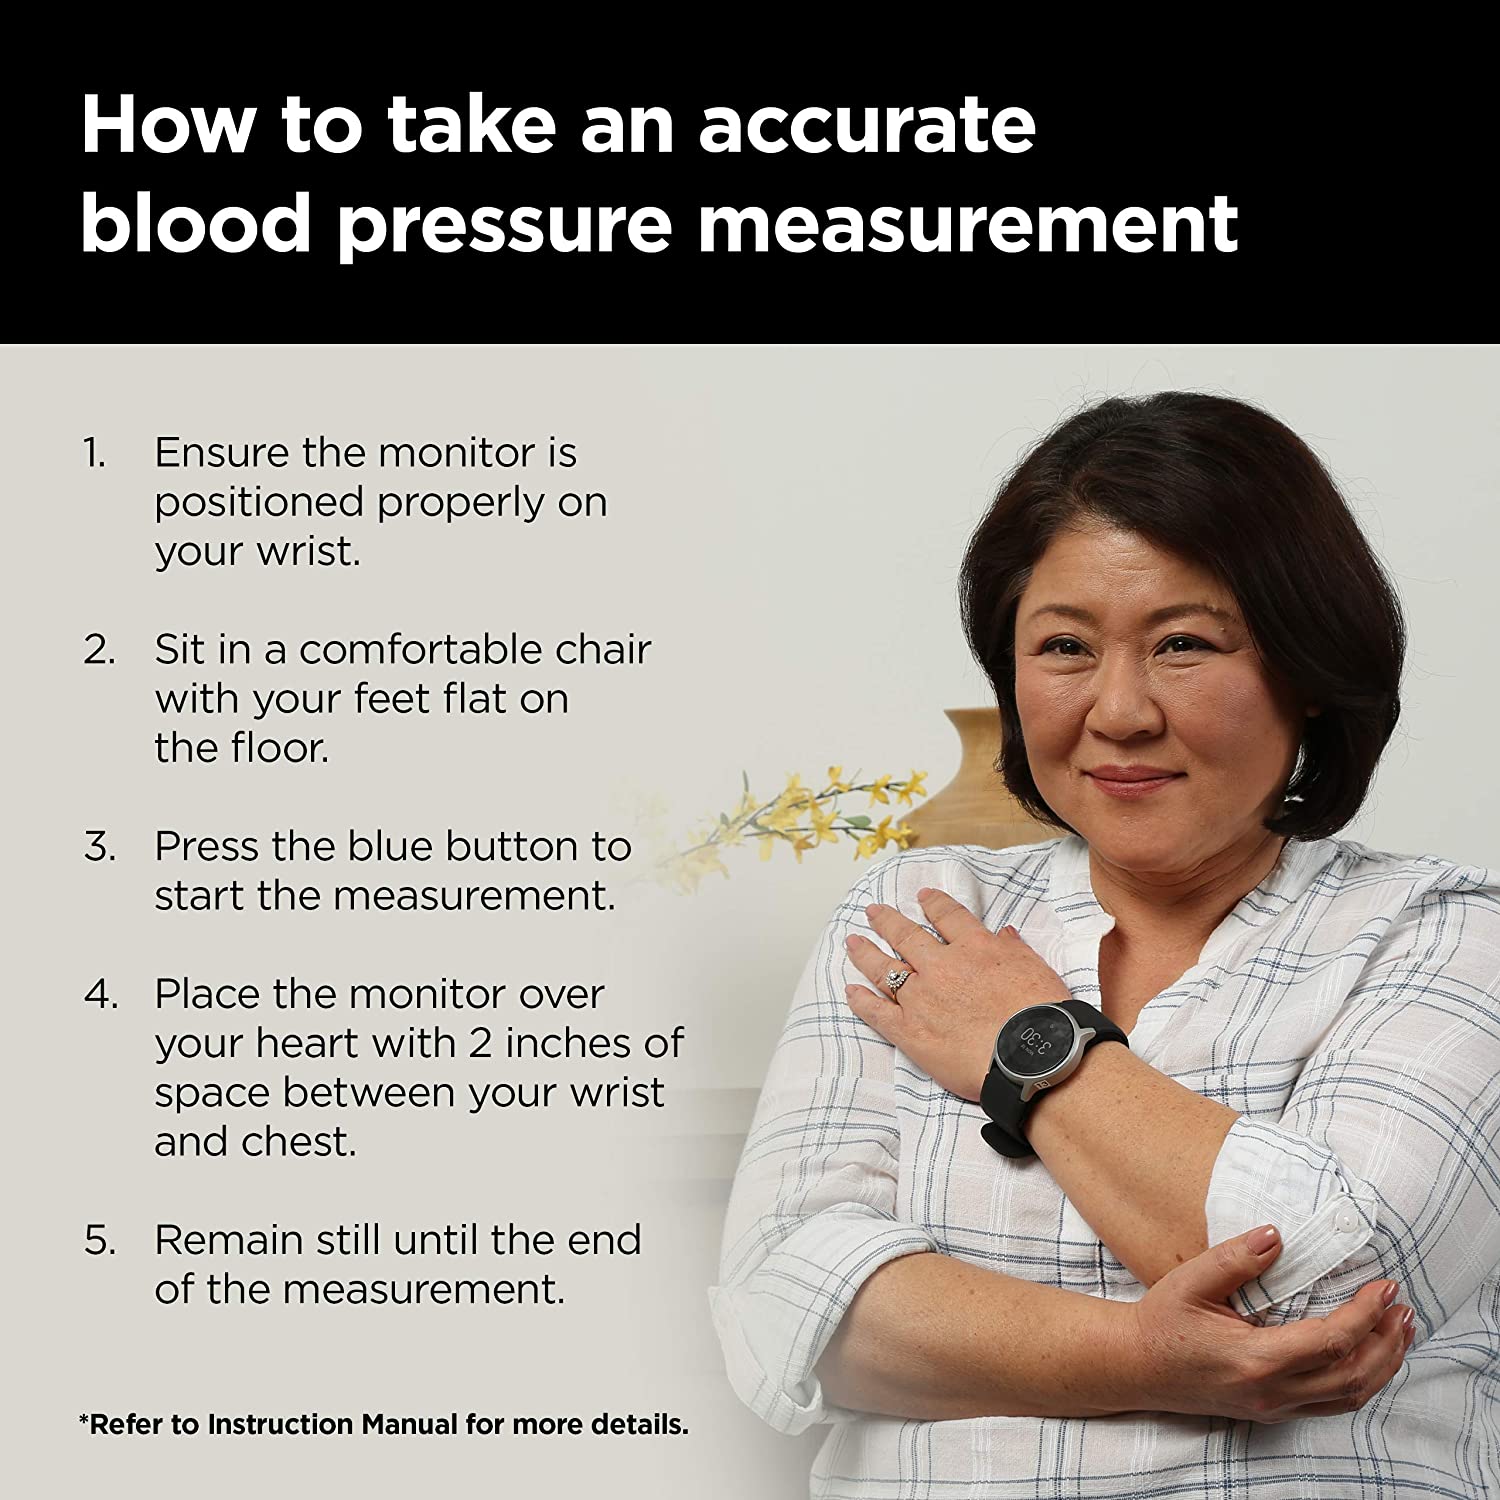 Omron HeartGuide Offers Blood Pressure Monitoring on Your Wrist